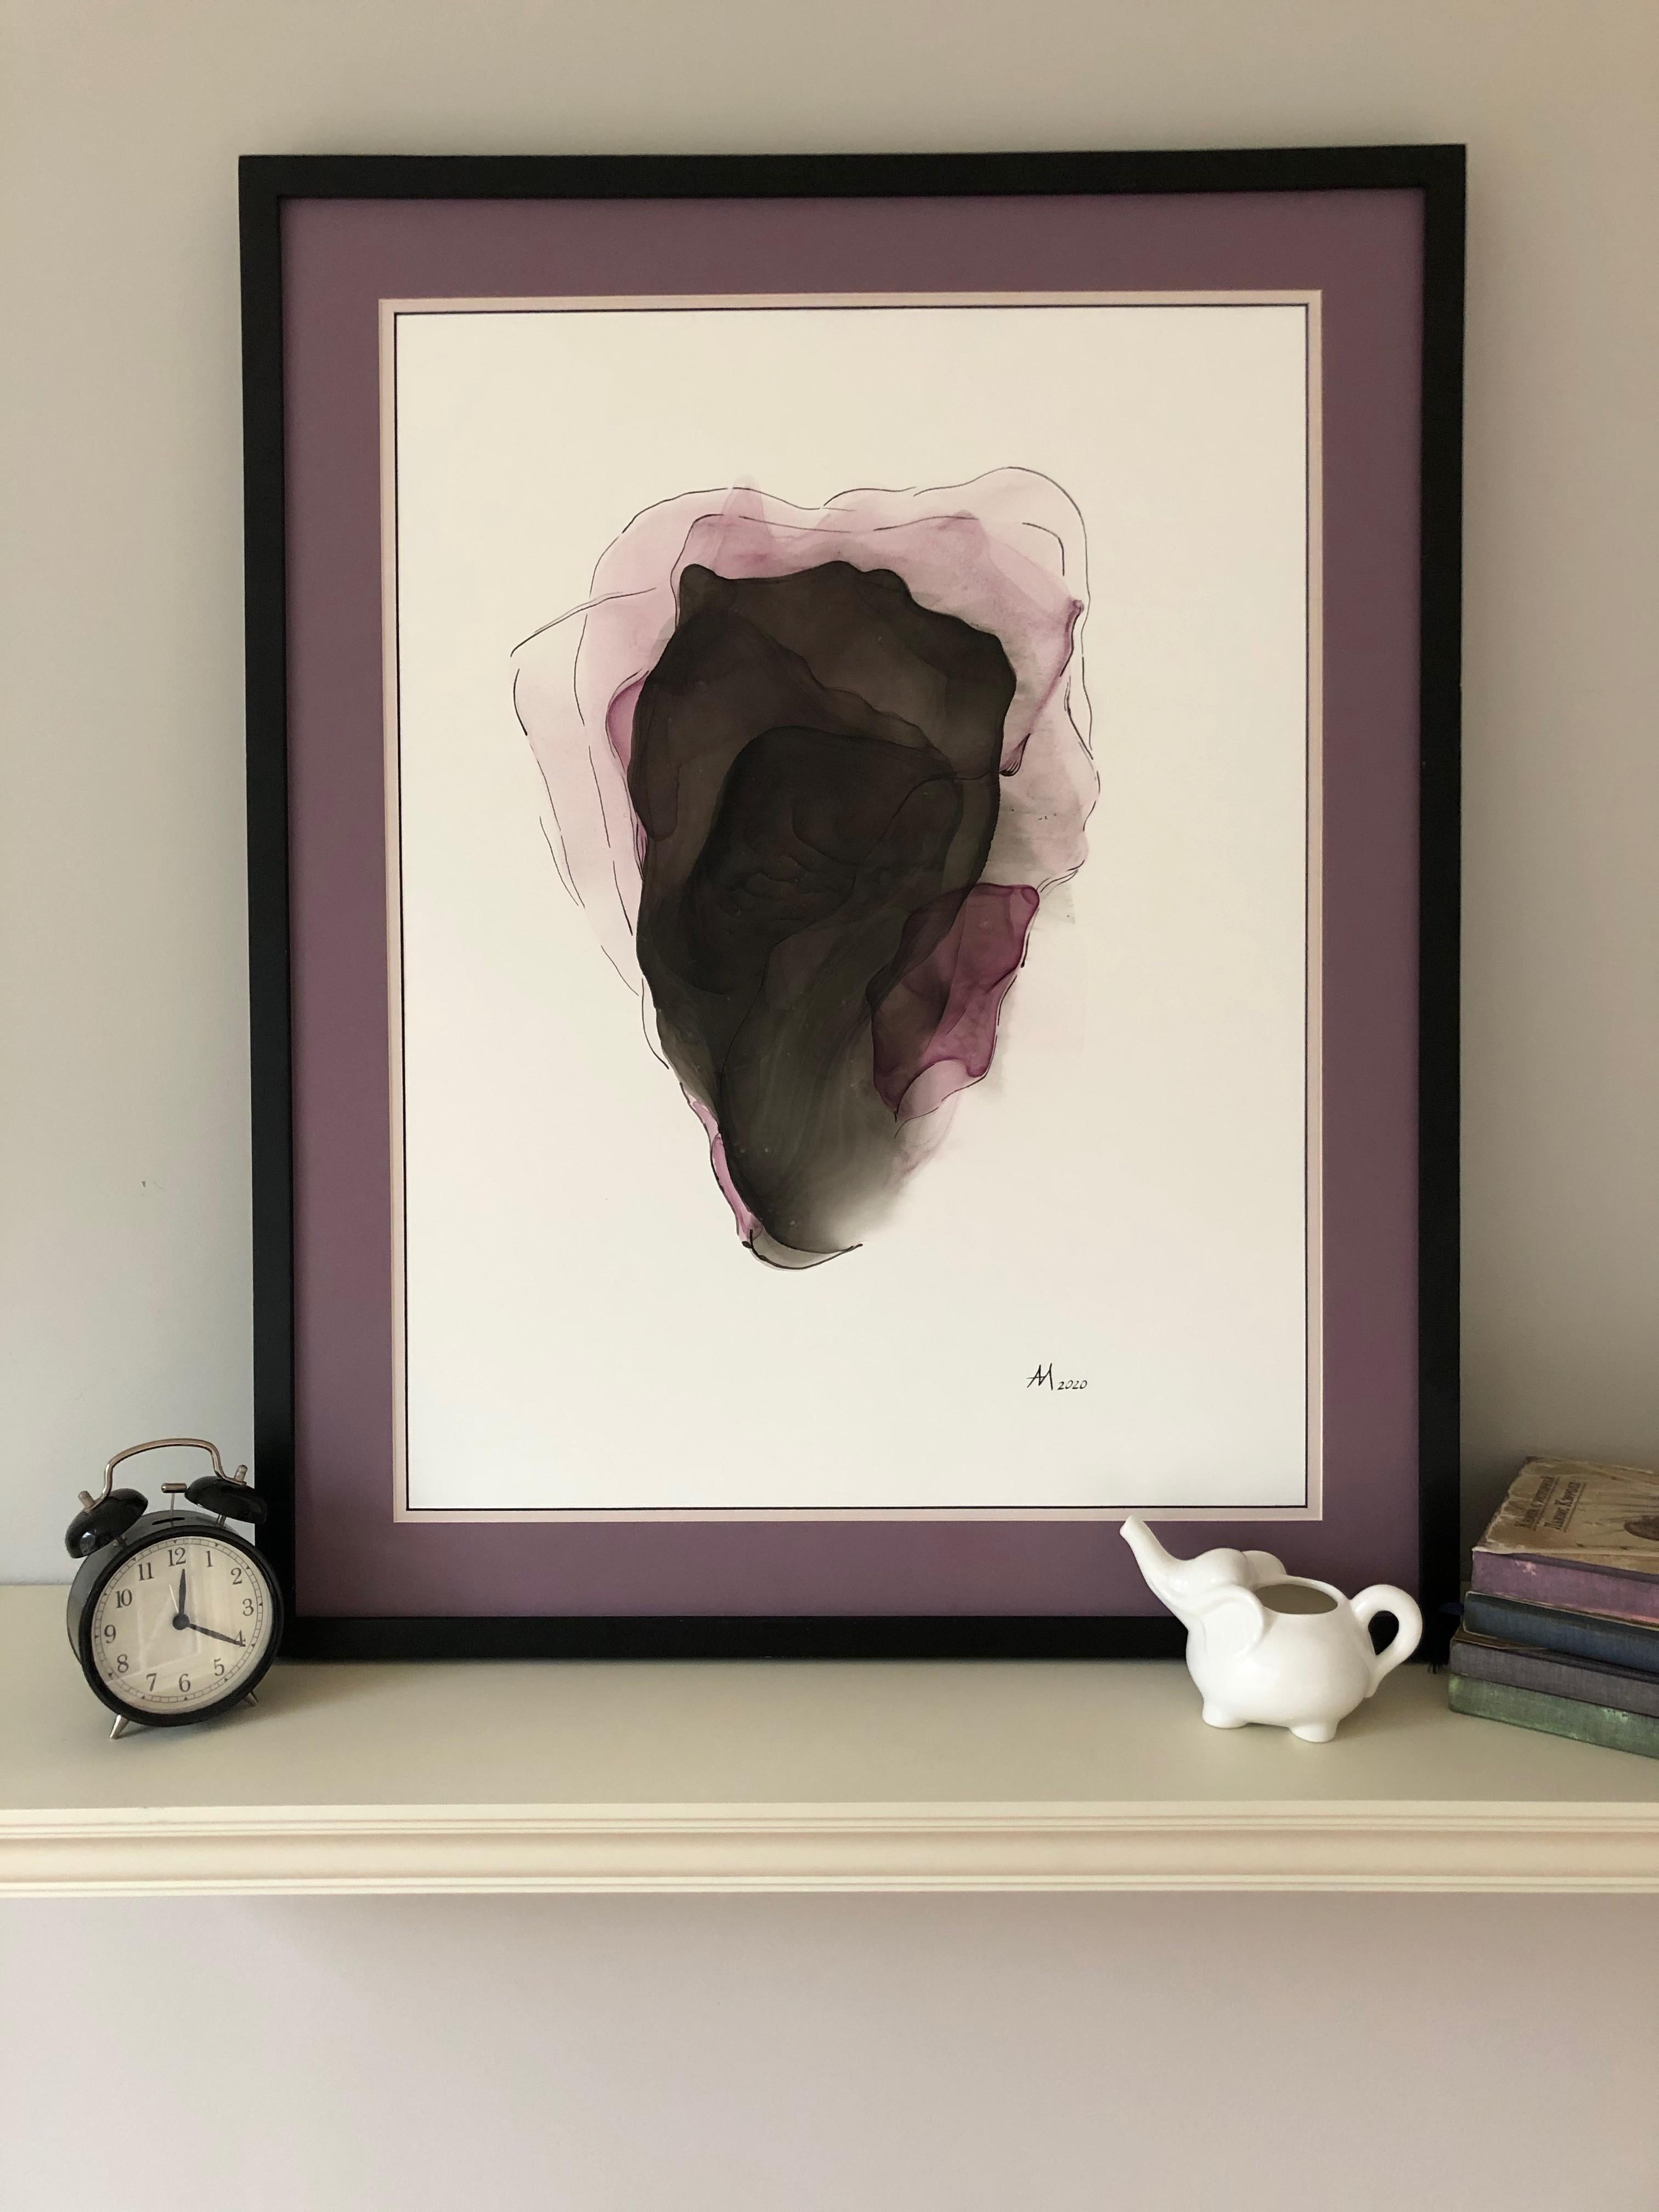 Iris-abstract painting, made in violet, black, beige, pale pink, rose color - Painting by Mila Akopova